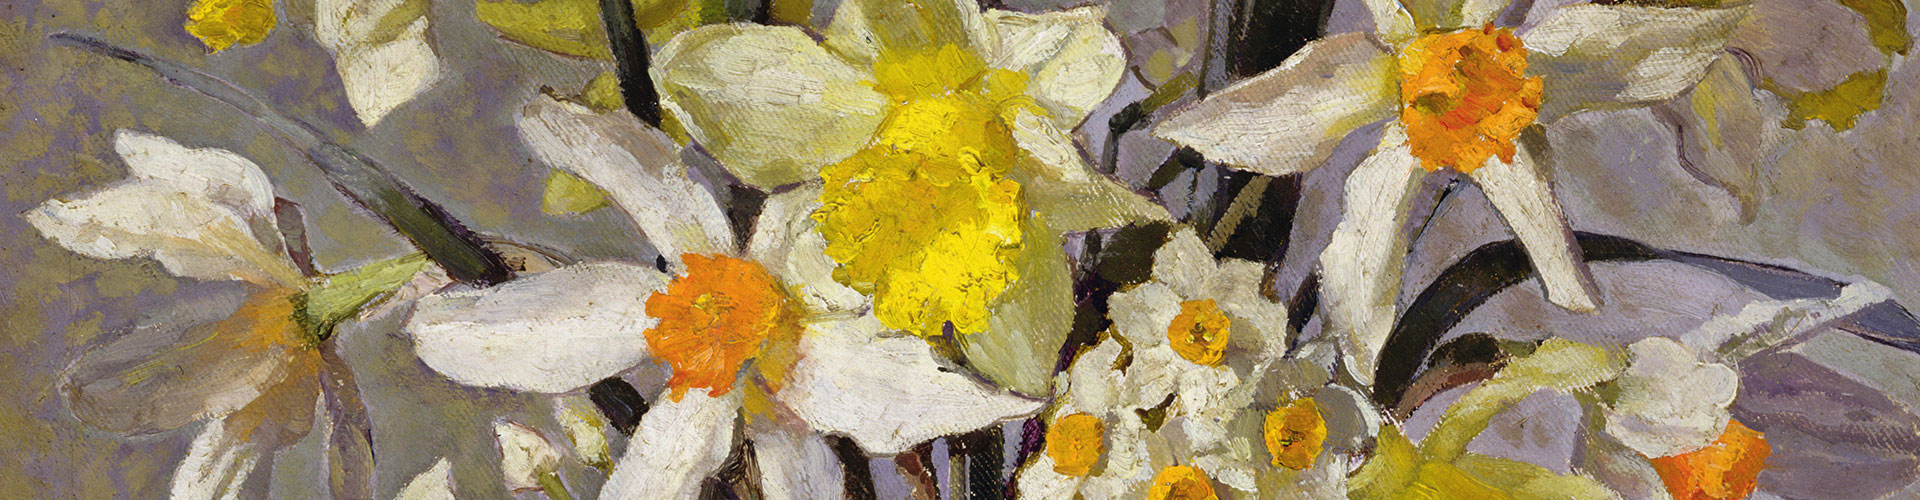 Daffodils, Greeting Card by Harold Harvey - Featured on Desktop Devices